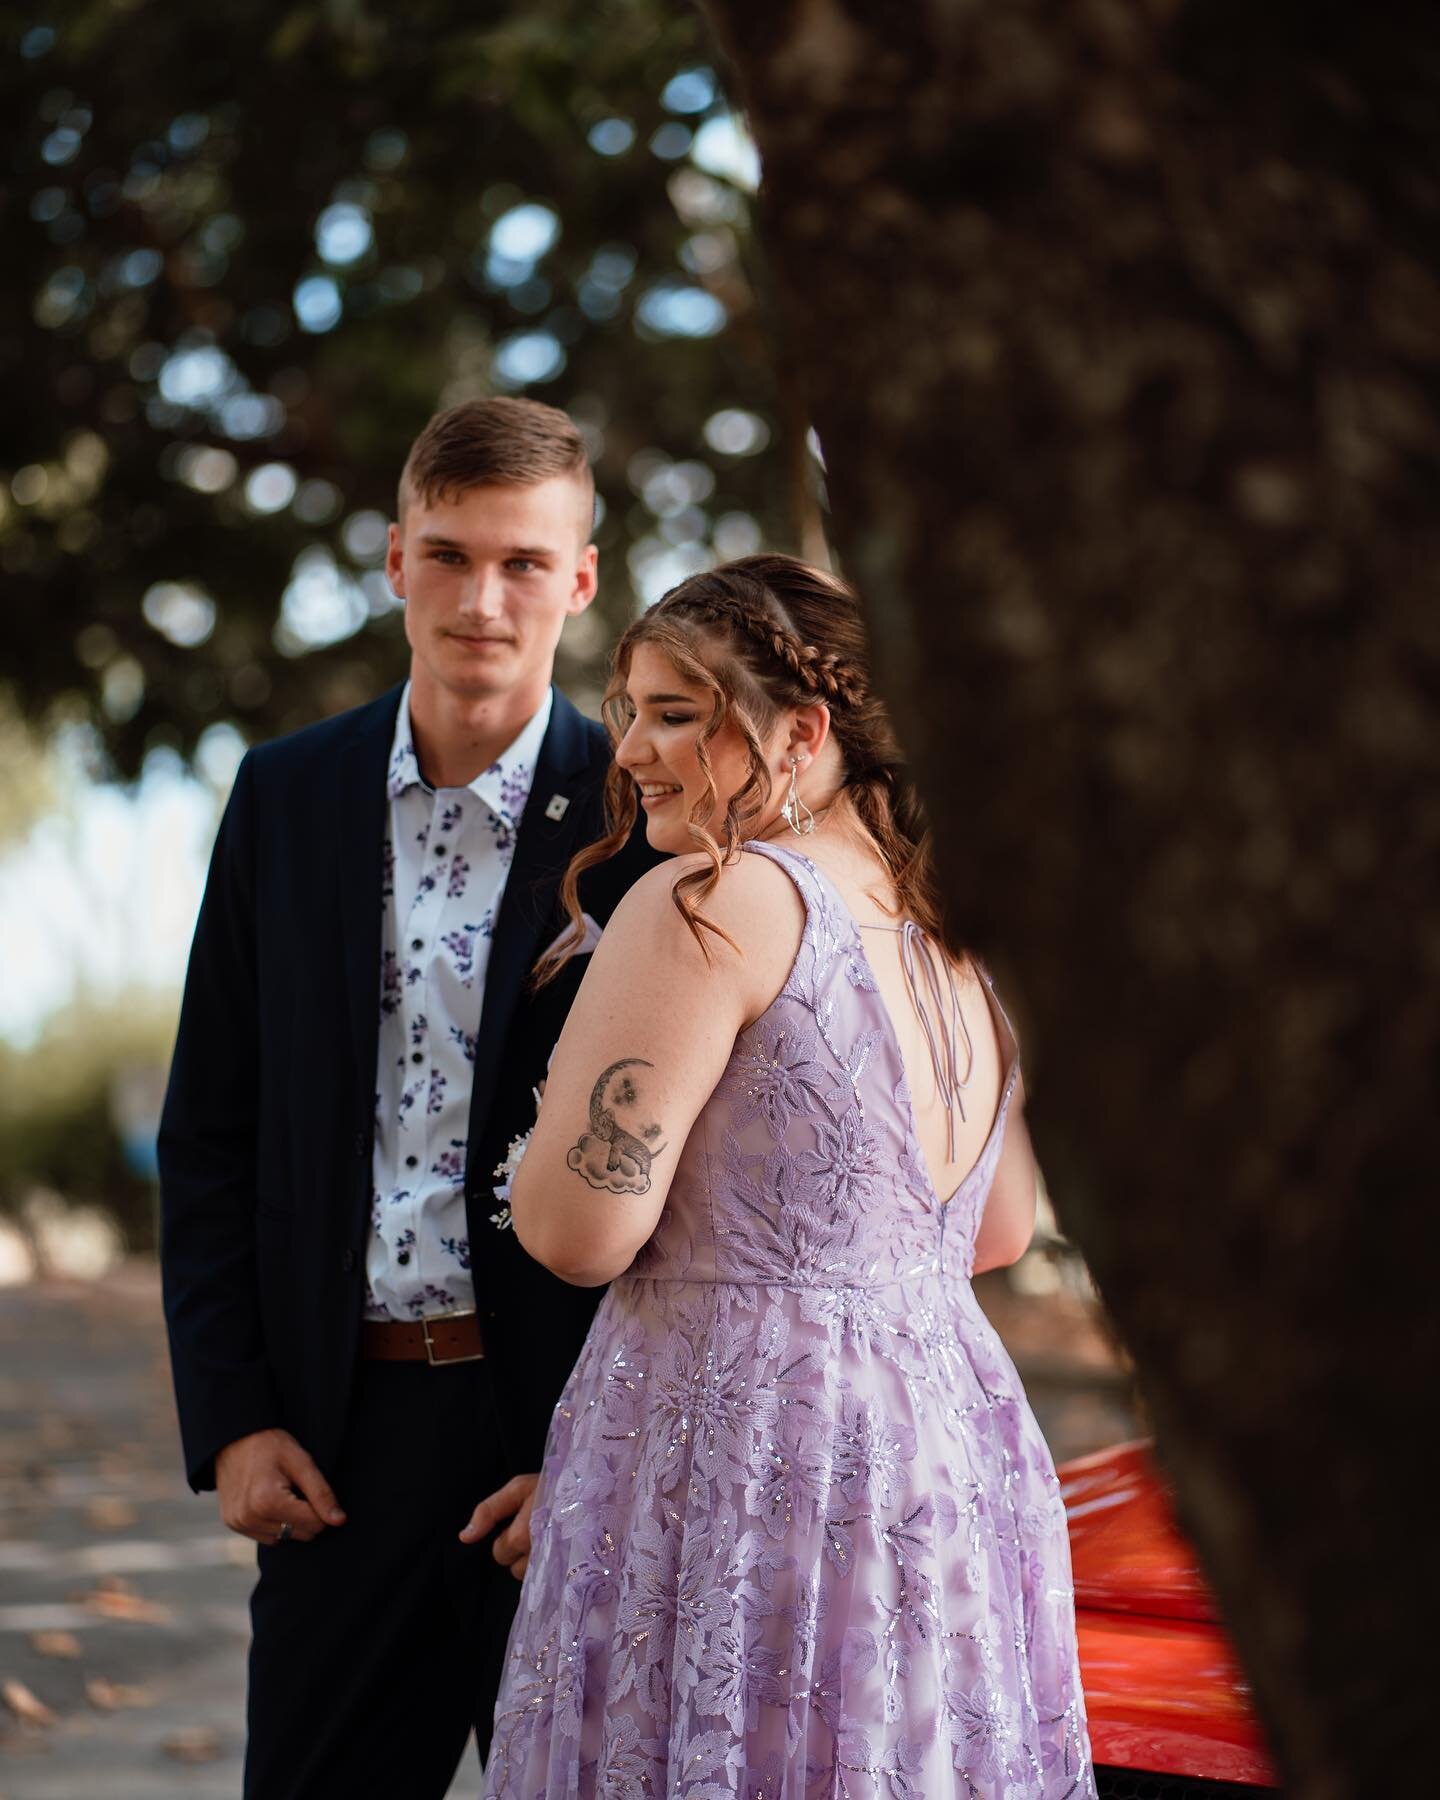 @lachlansmithy2023 + @__rose.alyssa__ / all dressed up, ready to take on the world.

The more we look back on this session, the more it gives us these beautiful, Disney-esque feels. Warm smiles, colours, details, movements - can&rsquo;t get enough! 
